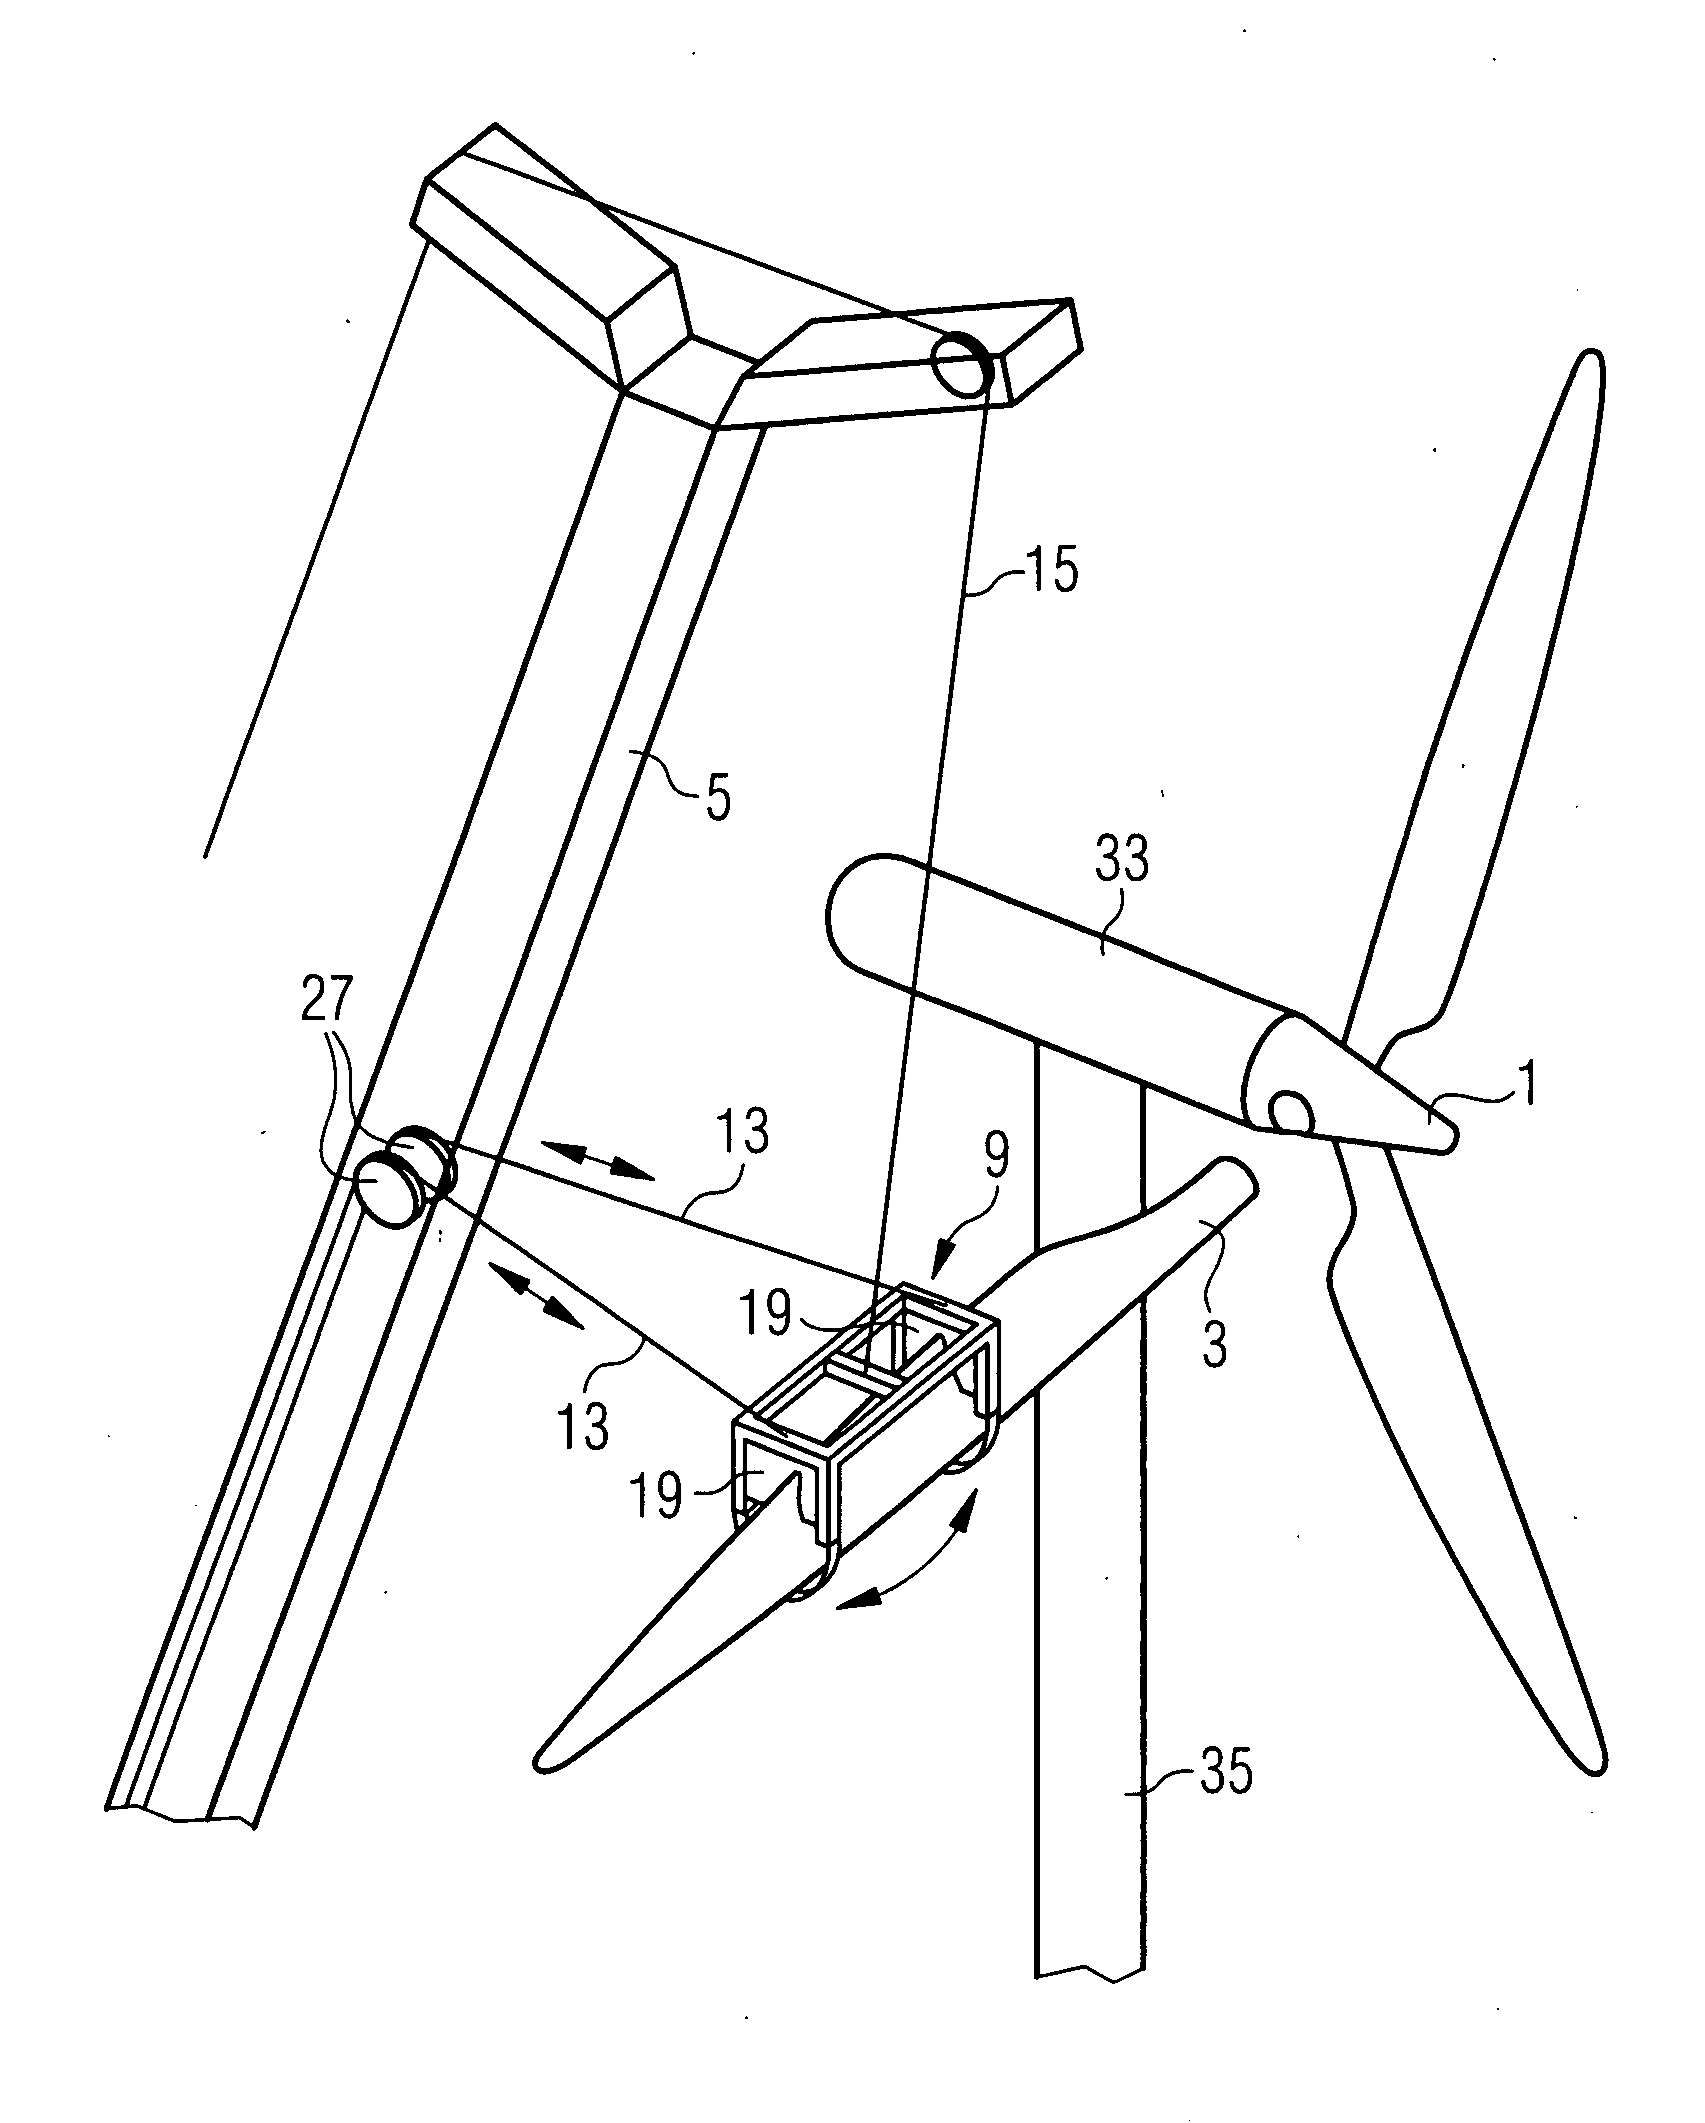 Method and device for mounting of wind turbine blades